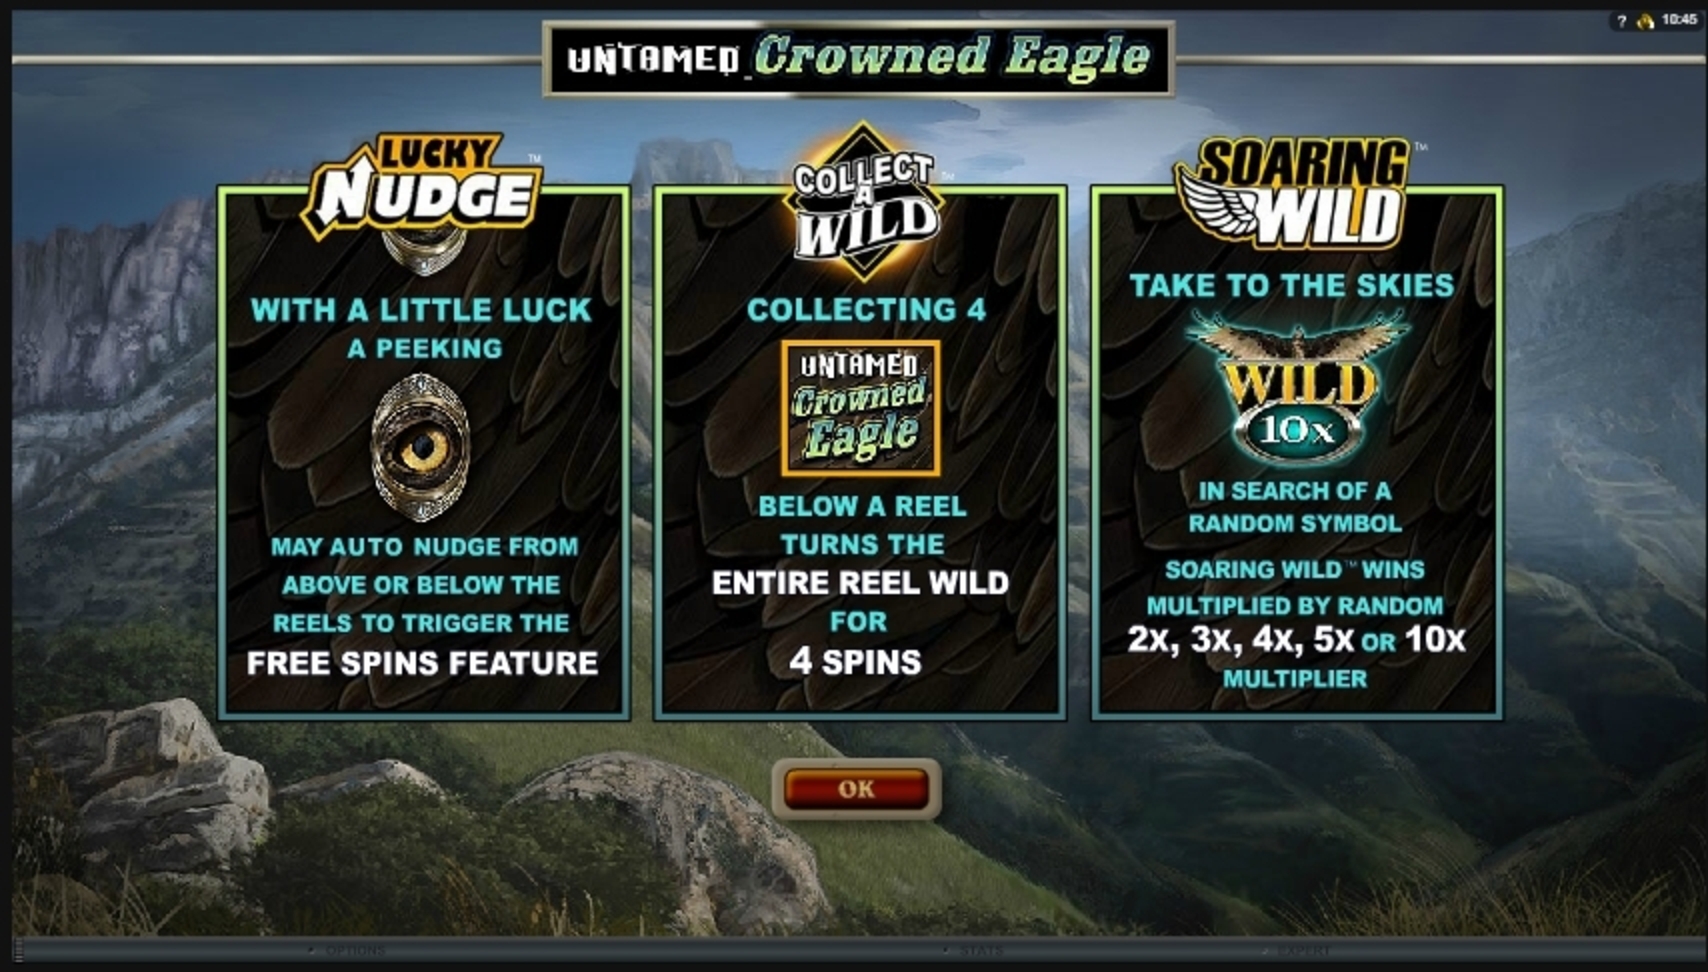 Play Untamed Crowned Eagle Free Casino Slot Game by Microgaming